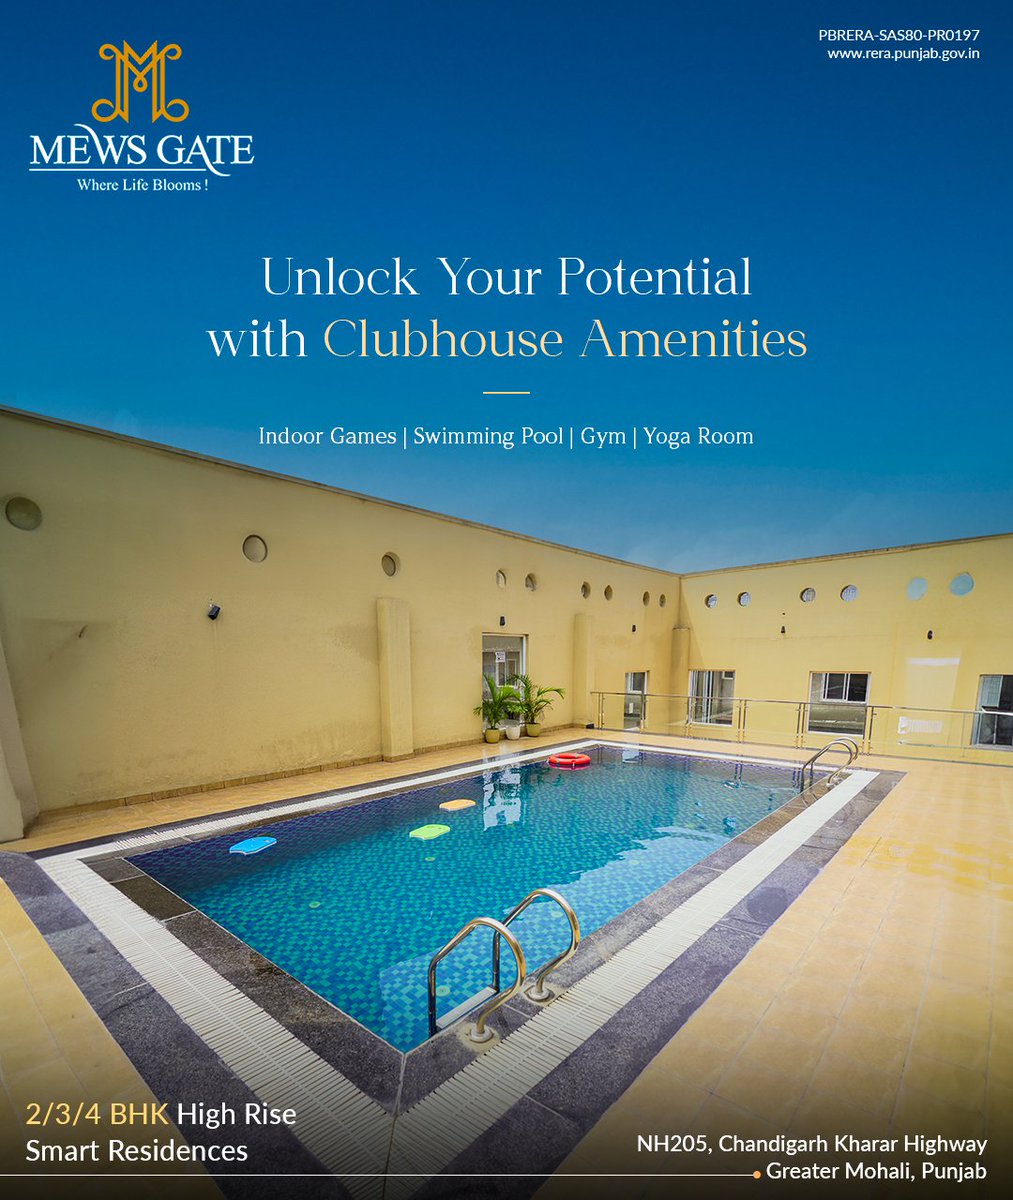 Our clubhouse amenities offer everything you need to pursue your interests. 🏠2/3/4 BHK High-Rise Smart Residences at Mews Gate 📍NH 205, Chandigarh Kharar Highway Greater Mohali, Punjab ↘️ Call us at 90695-90695 #MewsGate #Clubhouse #LuxuryLiving #CommunitySpaces